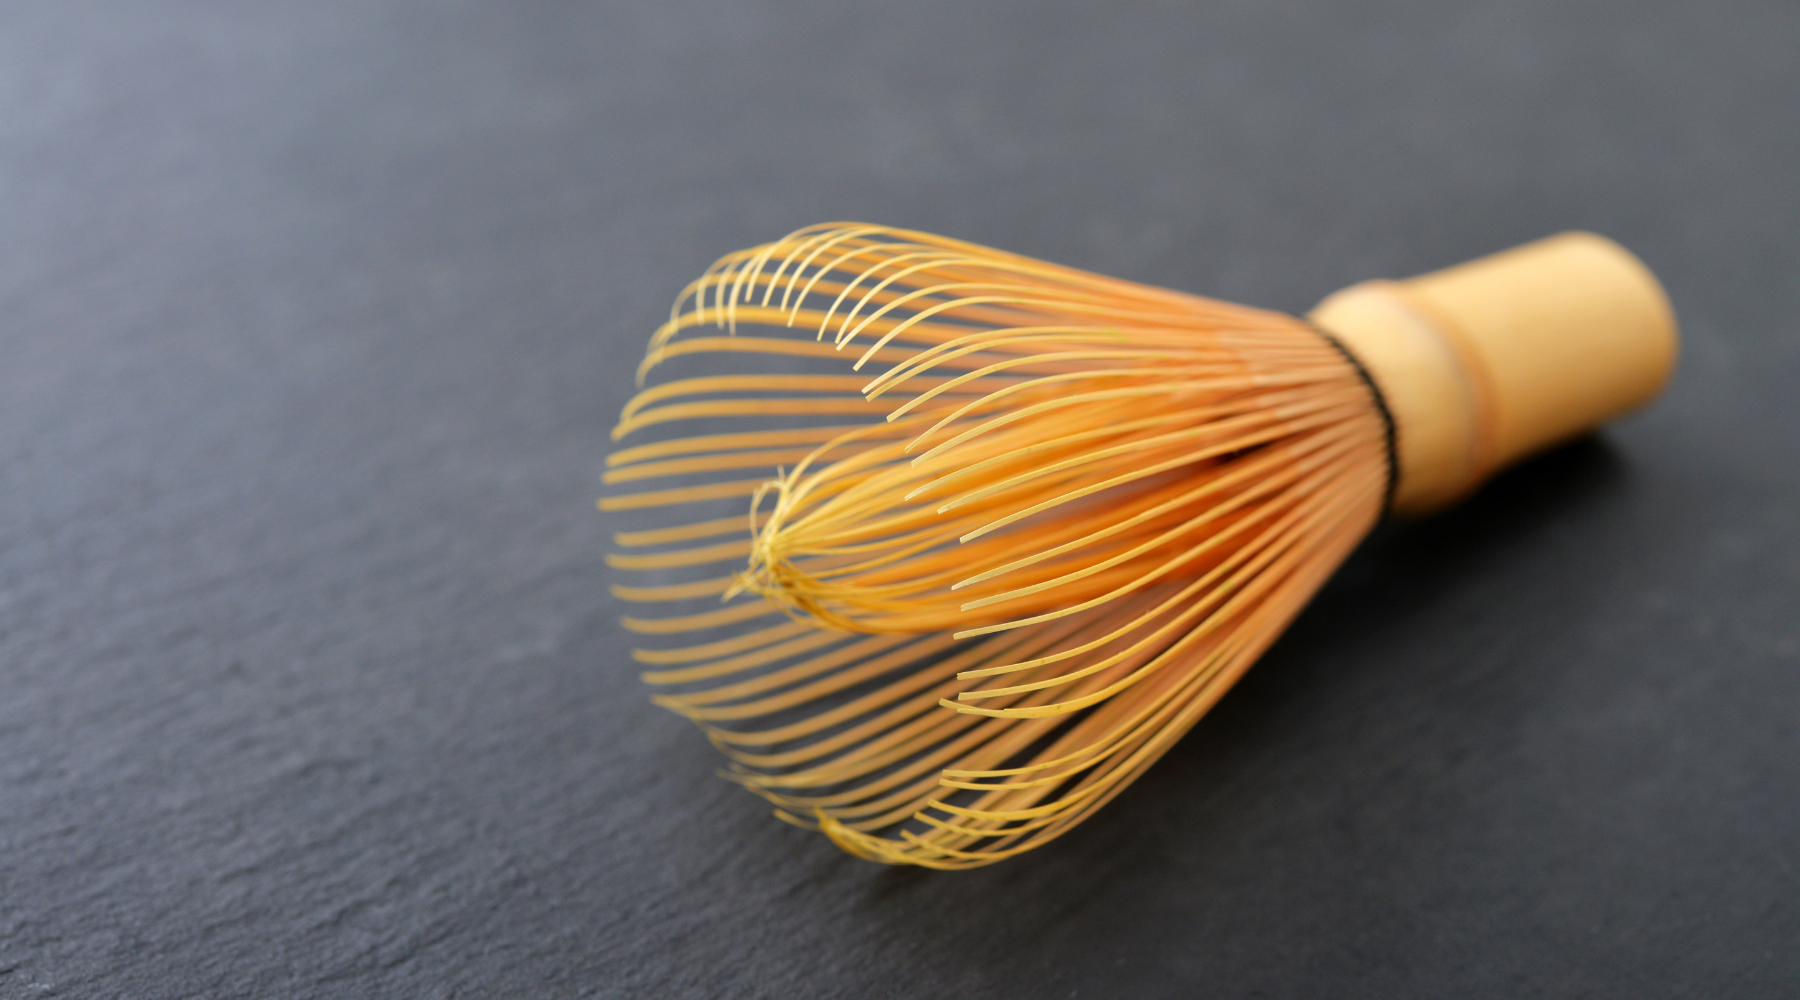 Bamboo matcha whisks are essential for the perfect tea experience.